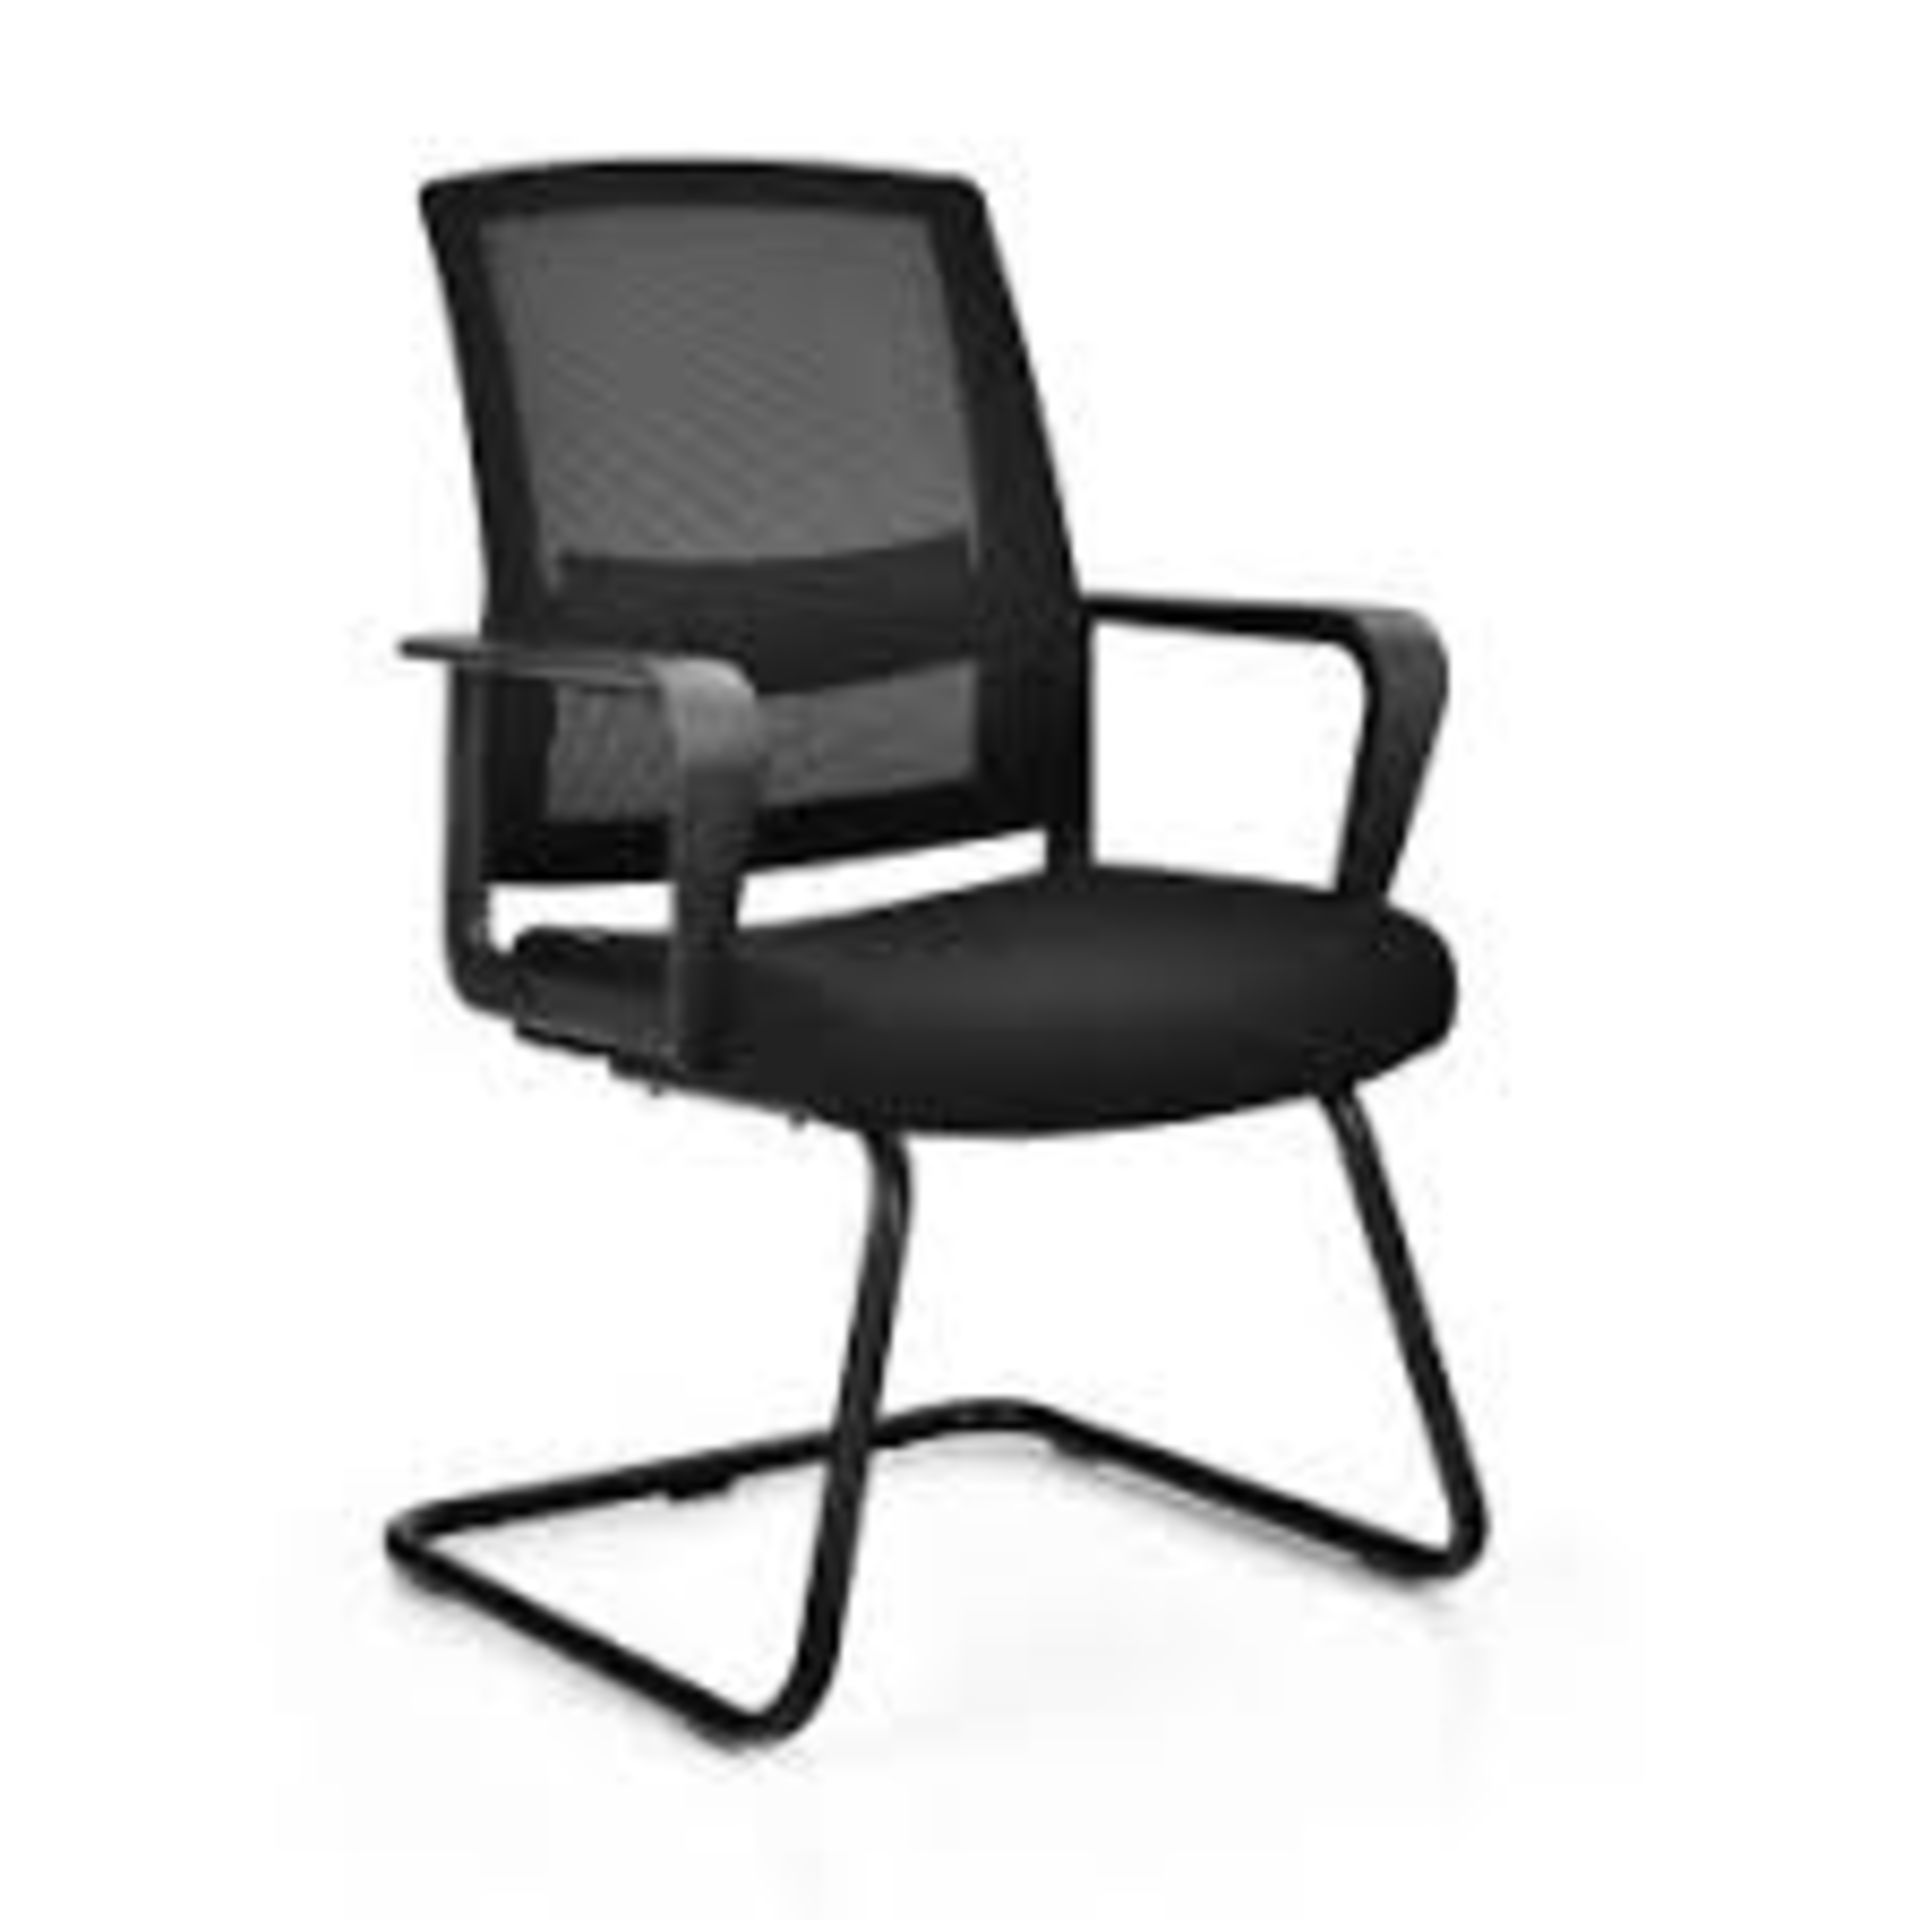 Mid Mesh Back Reception Chair with Adjustable Lumbar Support. -R14.15.